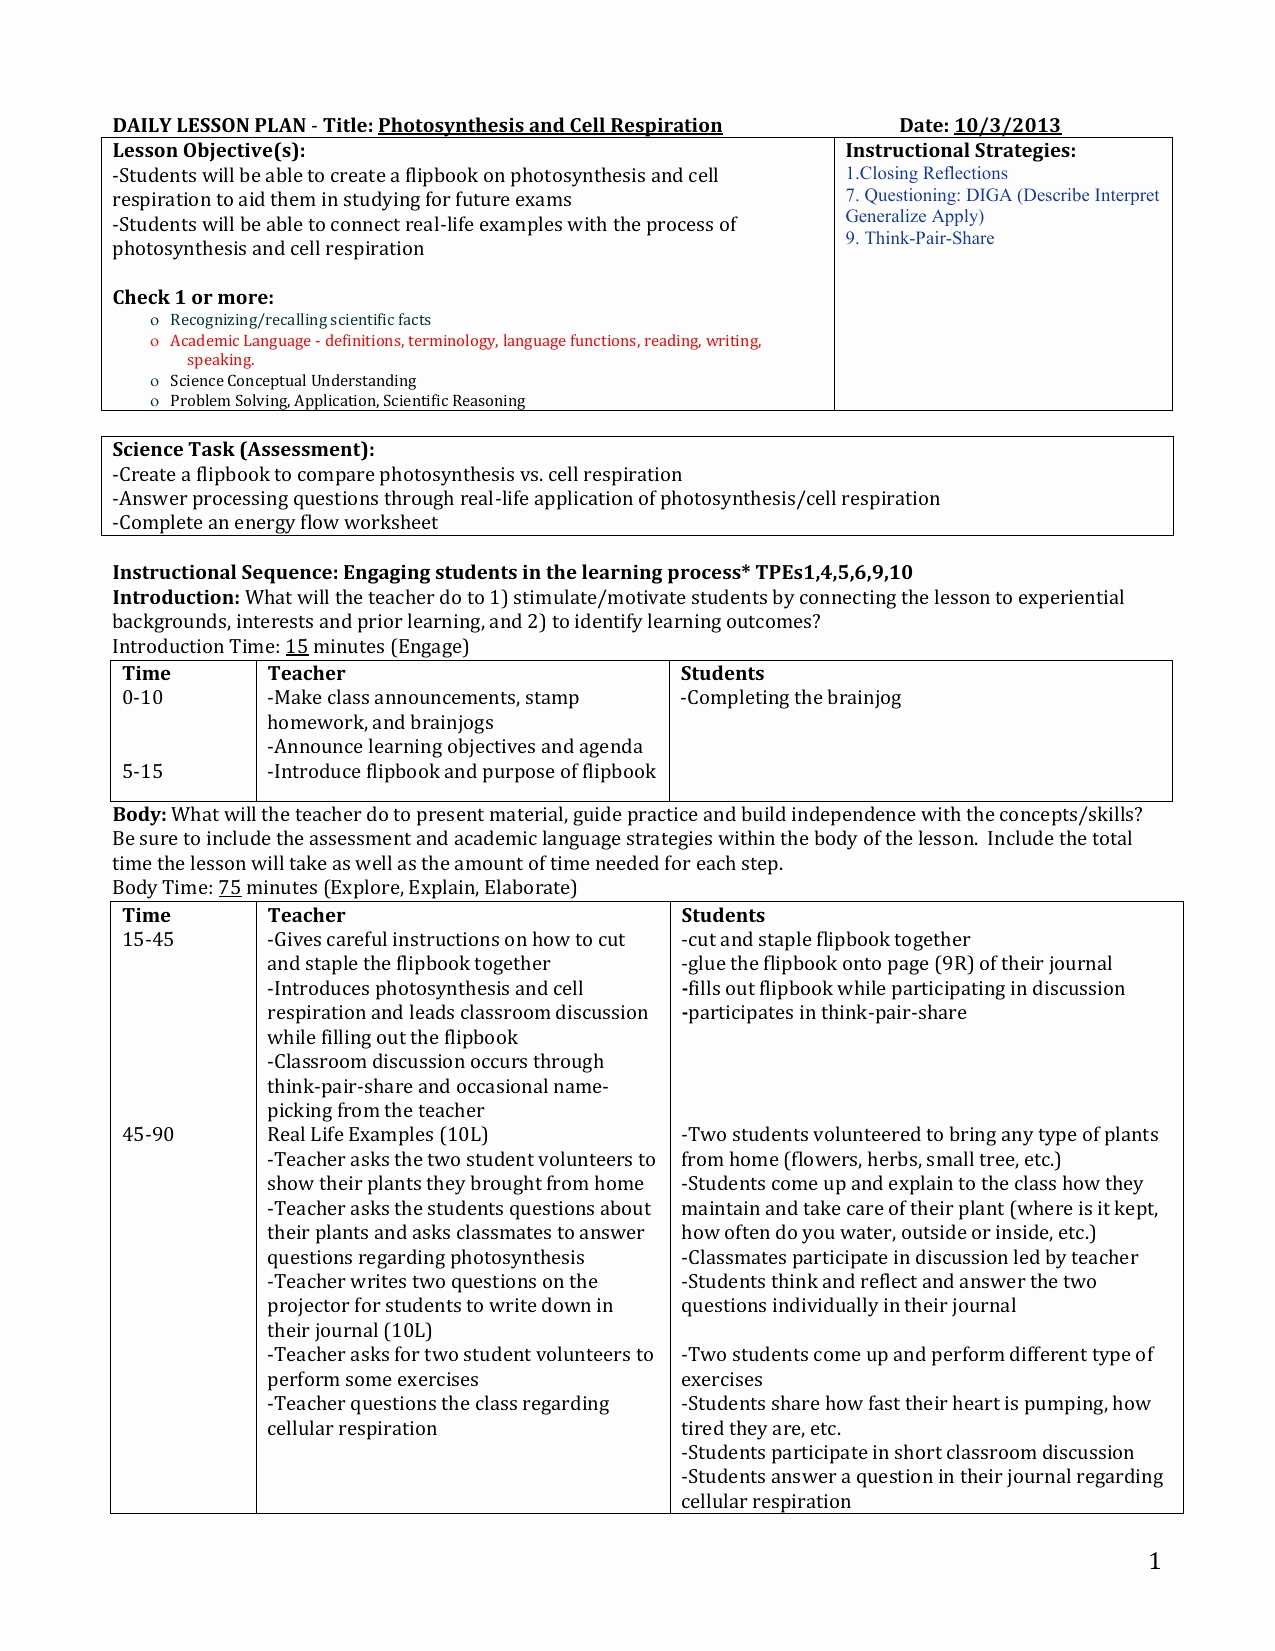 Photosynthesis and Cellular Respiration Worksheet Answers together with Synthesis Worksheet Answers Choice Image Worksheet for Kids